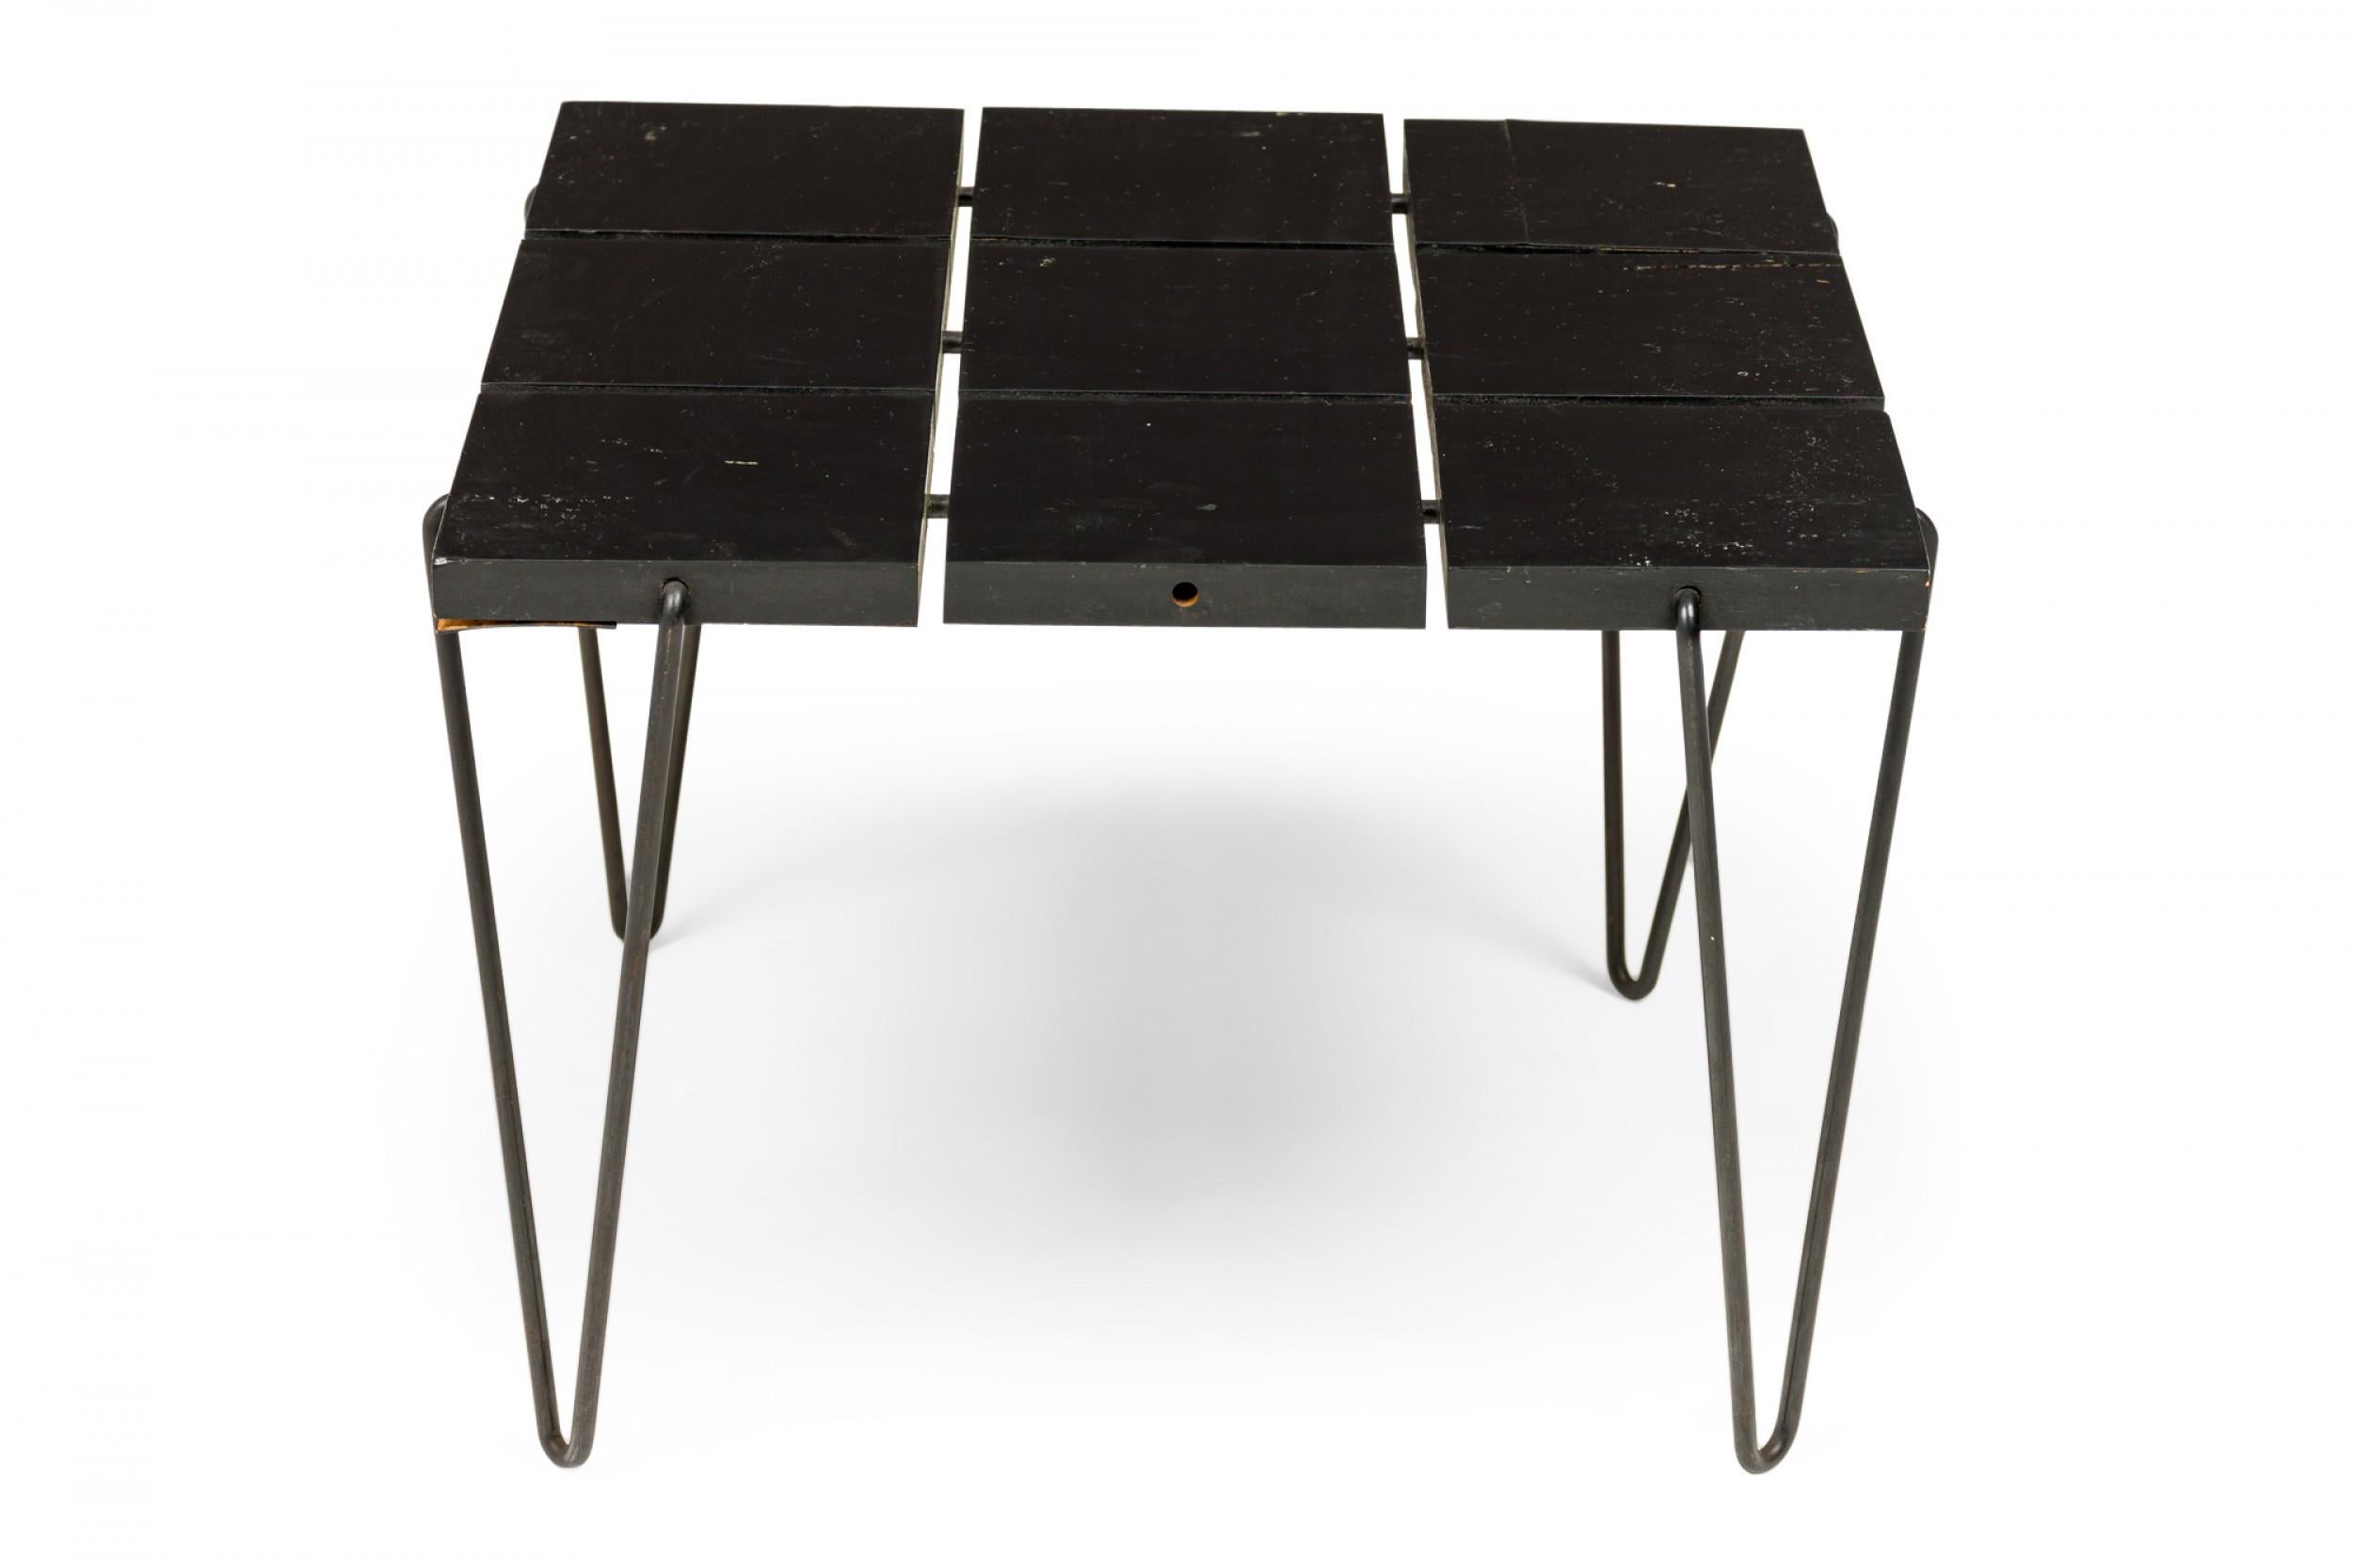 American Mid-Century end / side table with a top comprised of nine ebonized wooden square pieces connected by a flexible wire frame, resting on four black hairpin wire legs. (TONY PAUL)
